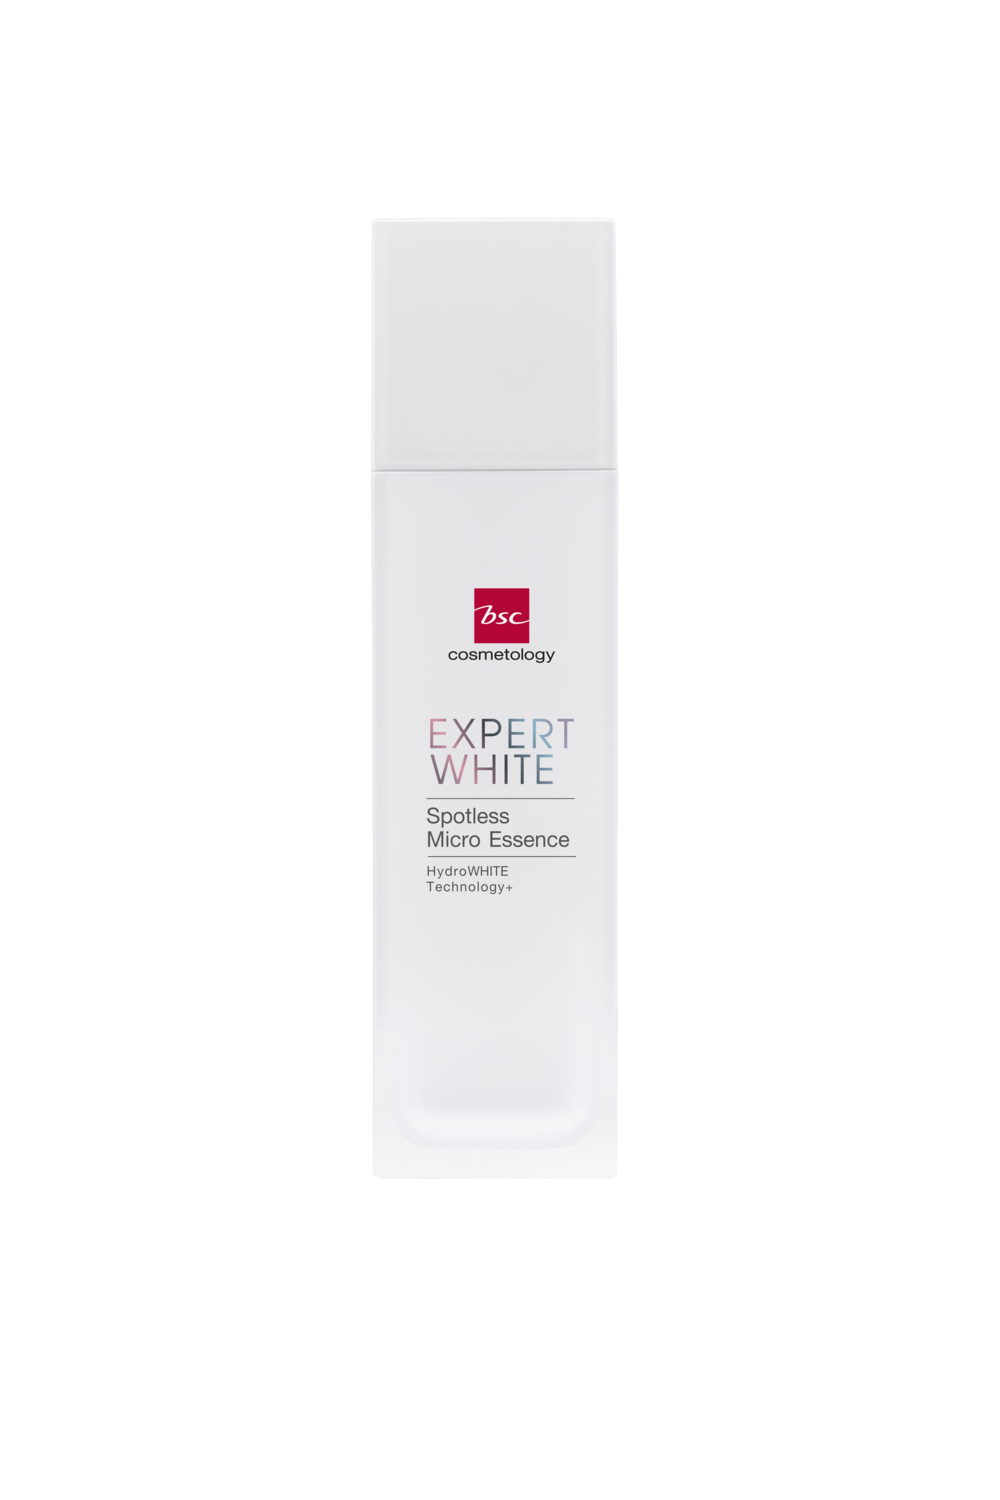 BSC EXPERT WHITE SPOTLESS MICRO ESSENCE